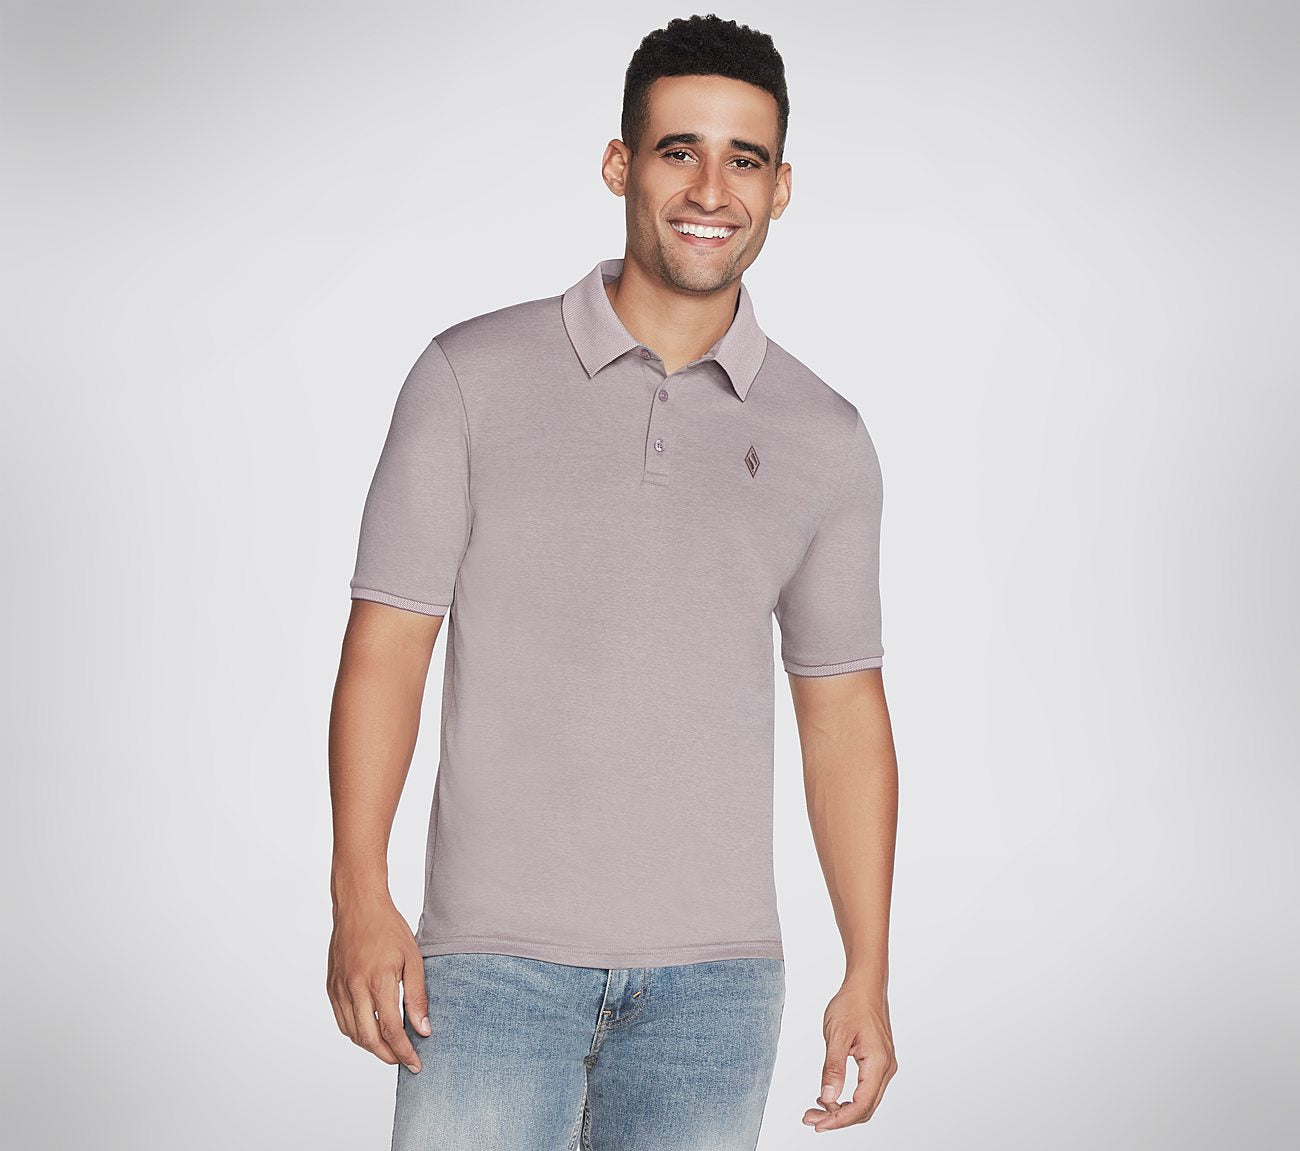 Off Duty Polo Shirt Clothes Skechers